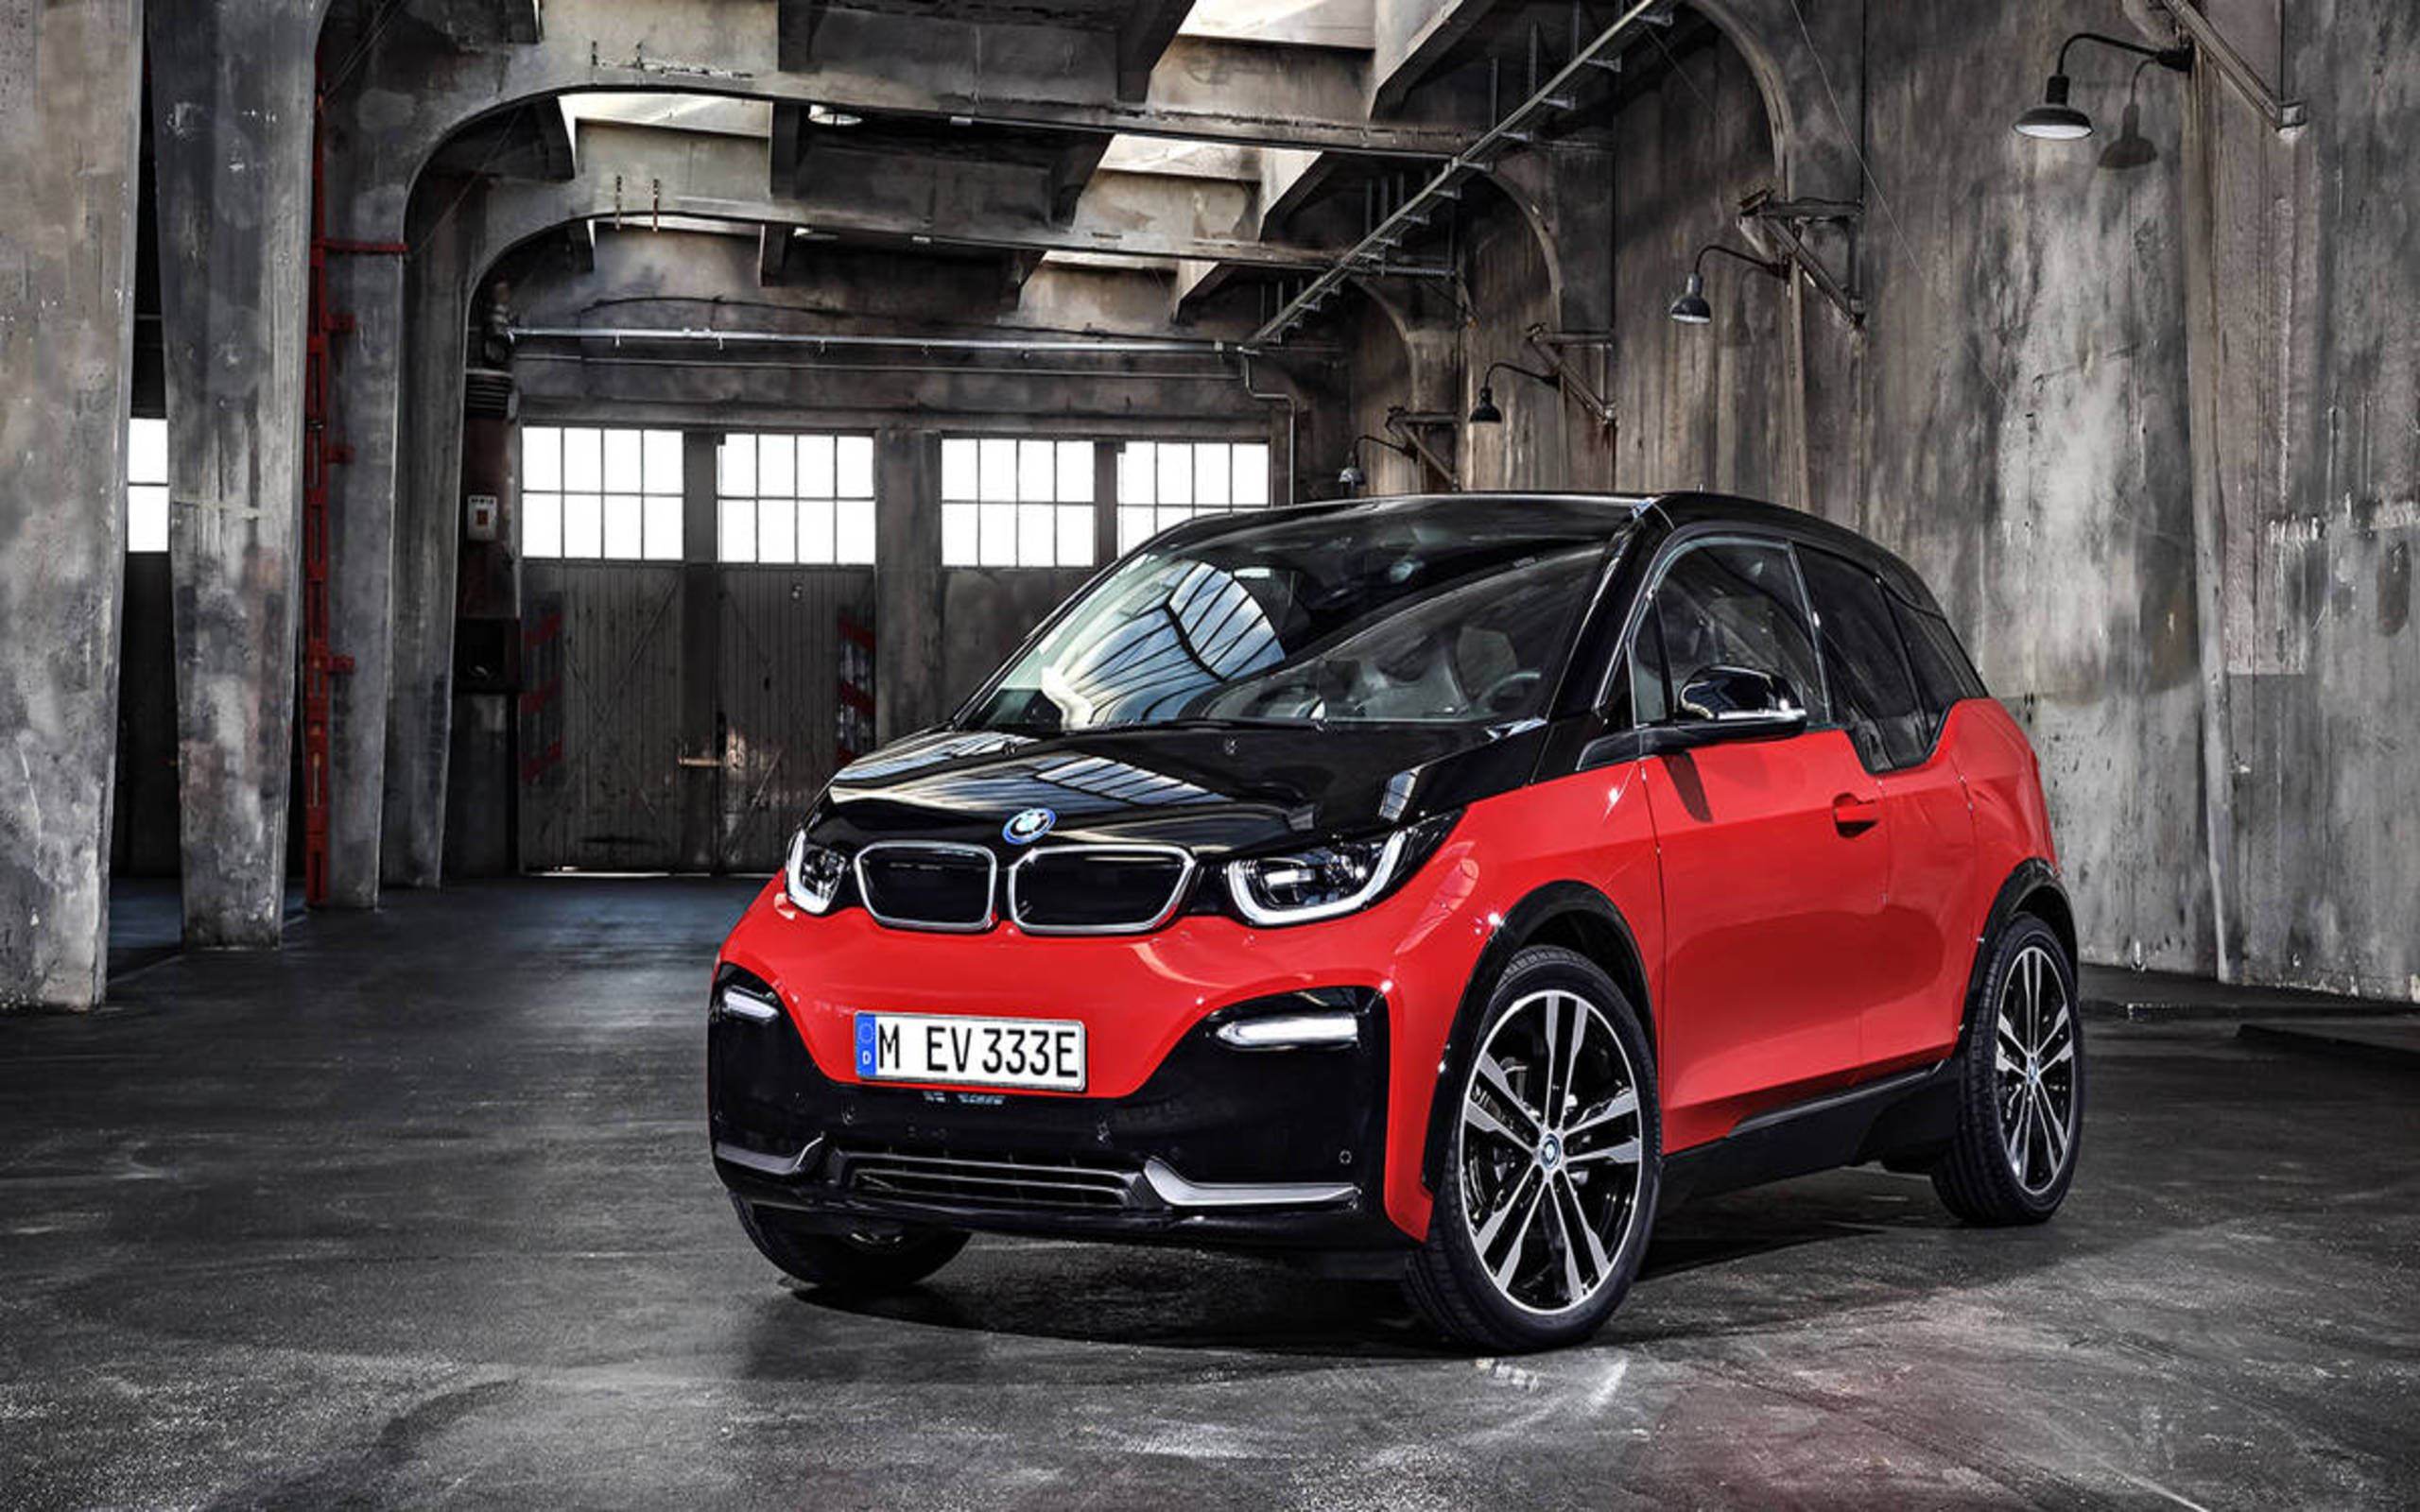 Bmw May Not Replace The I3 Or I8 After This Generation But It Might Not Matter Either Way